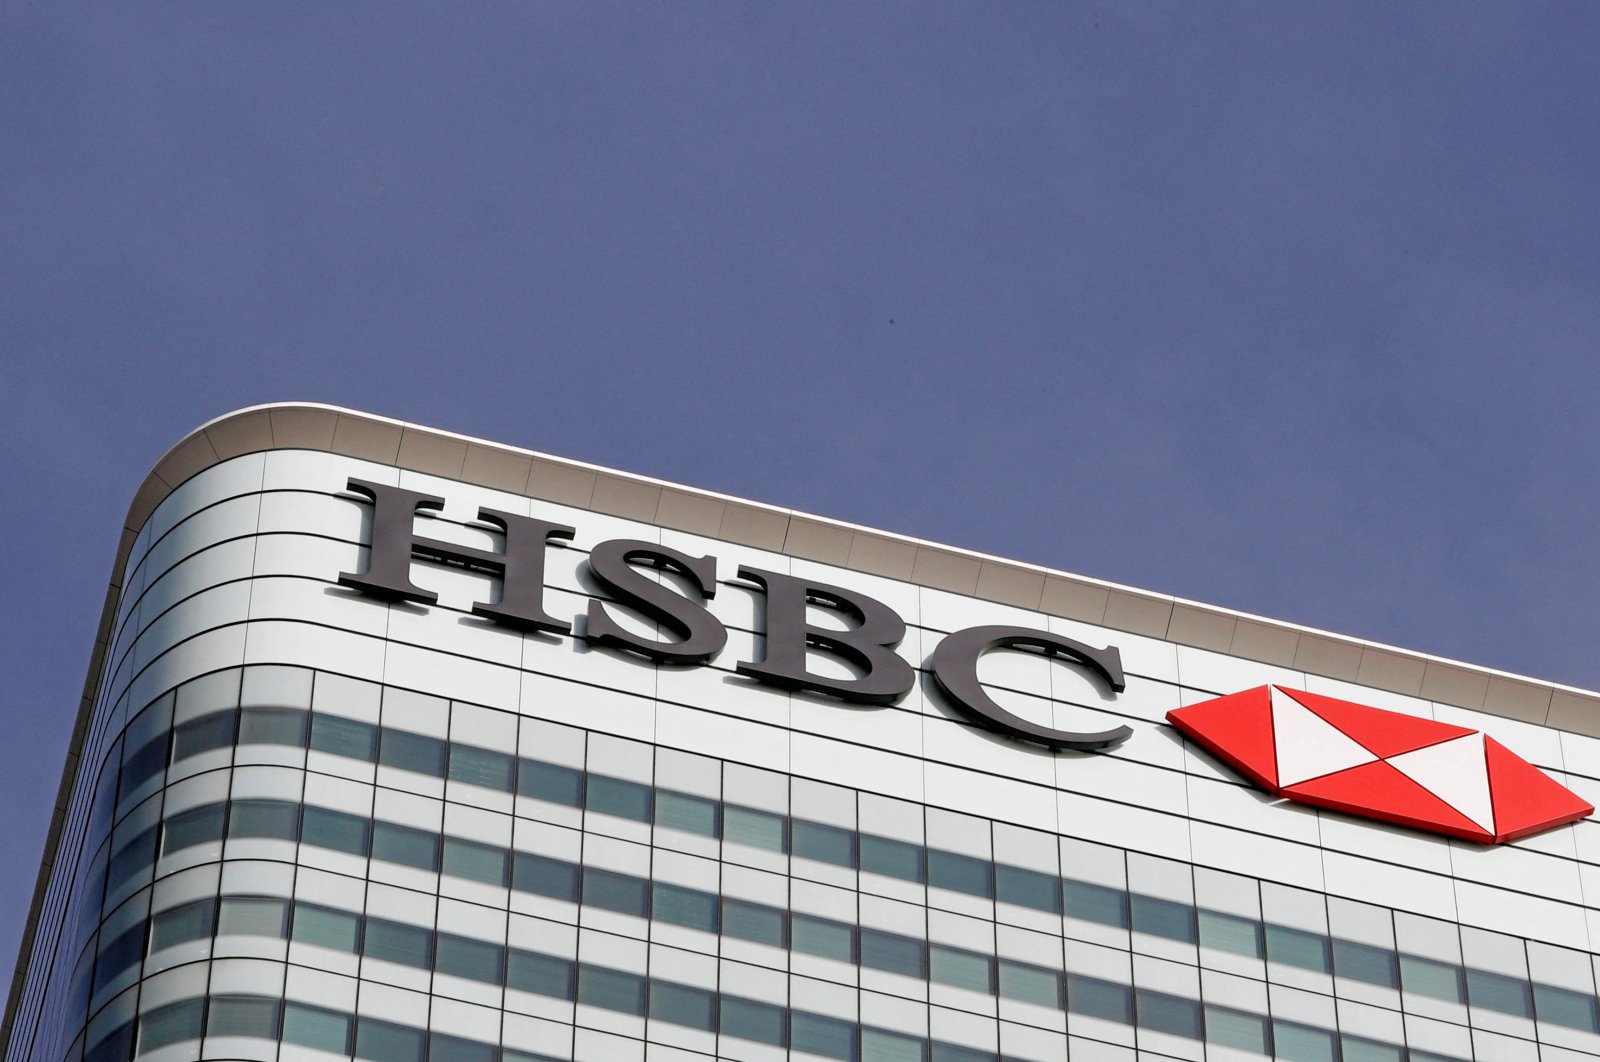 The HSBC bank logo is seen in the Canary Wharf financial district in London, Britain, March 3, 2016.  (Reuters Photo)